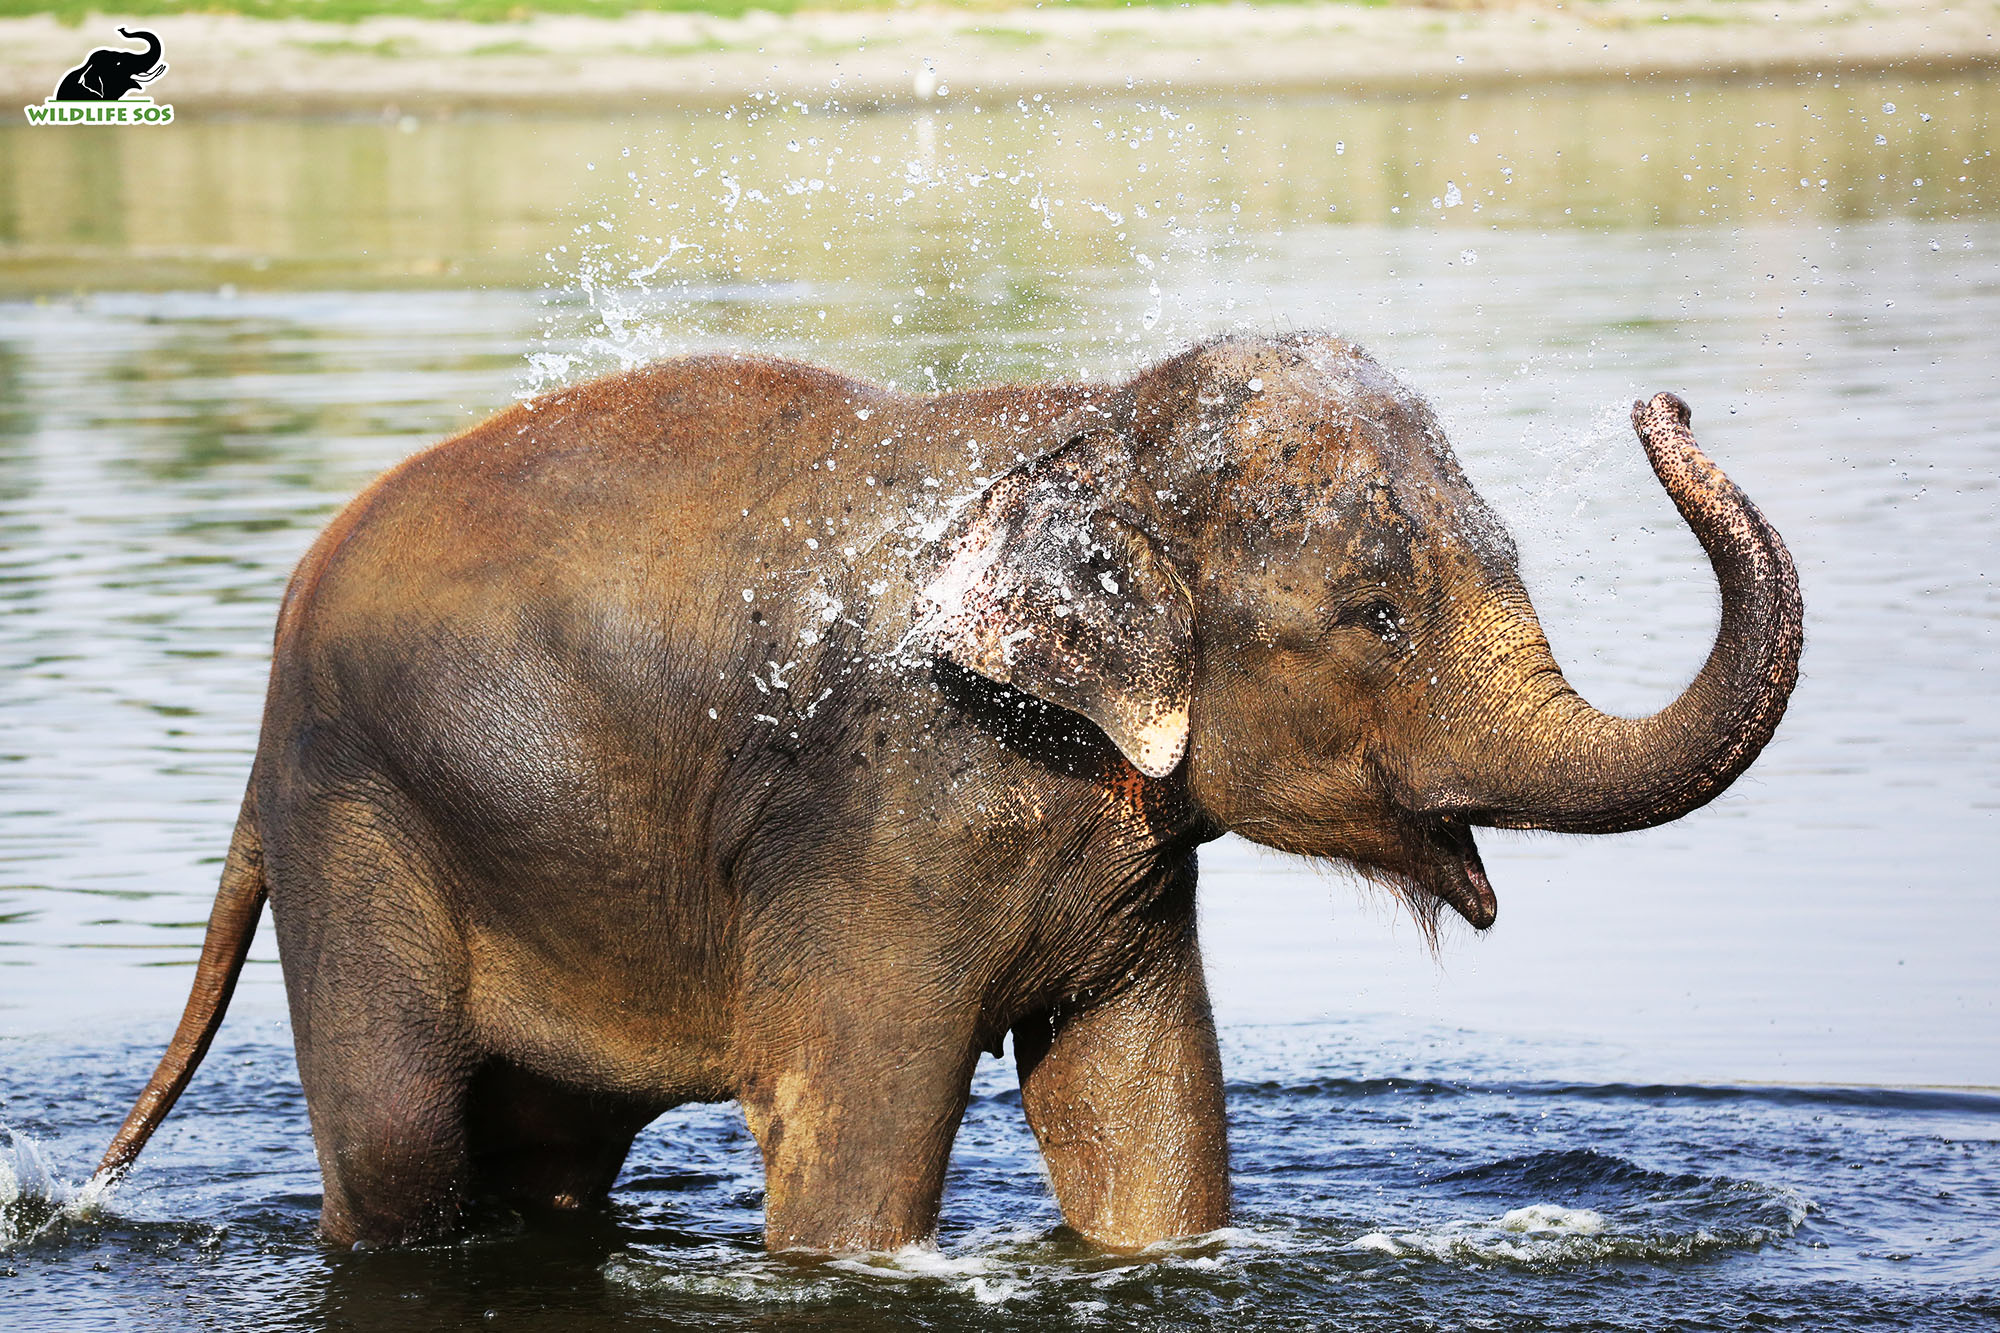 Apart from providing respite from the heat, the water is effective in providing comfort to the elephants’ painful joints and feet